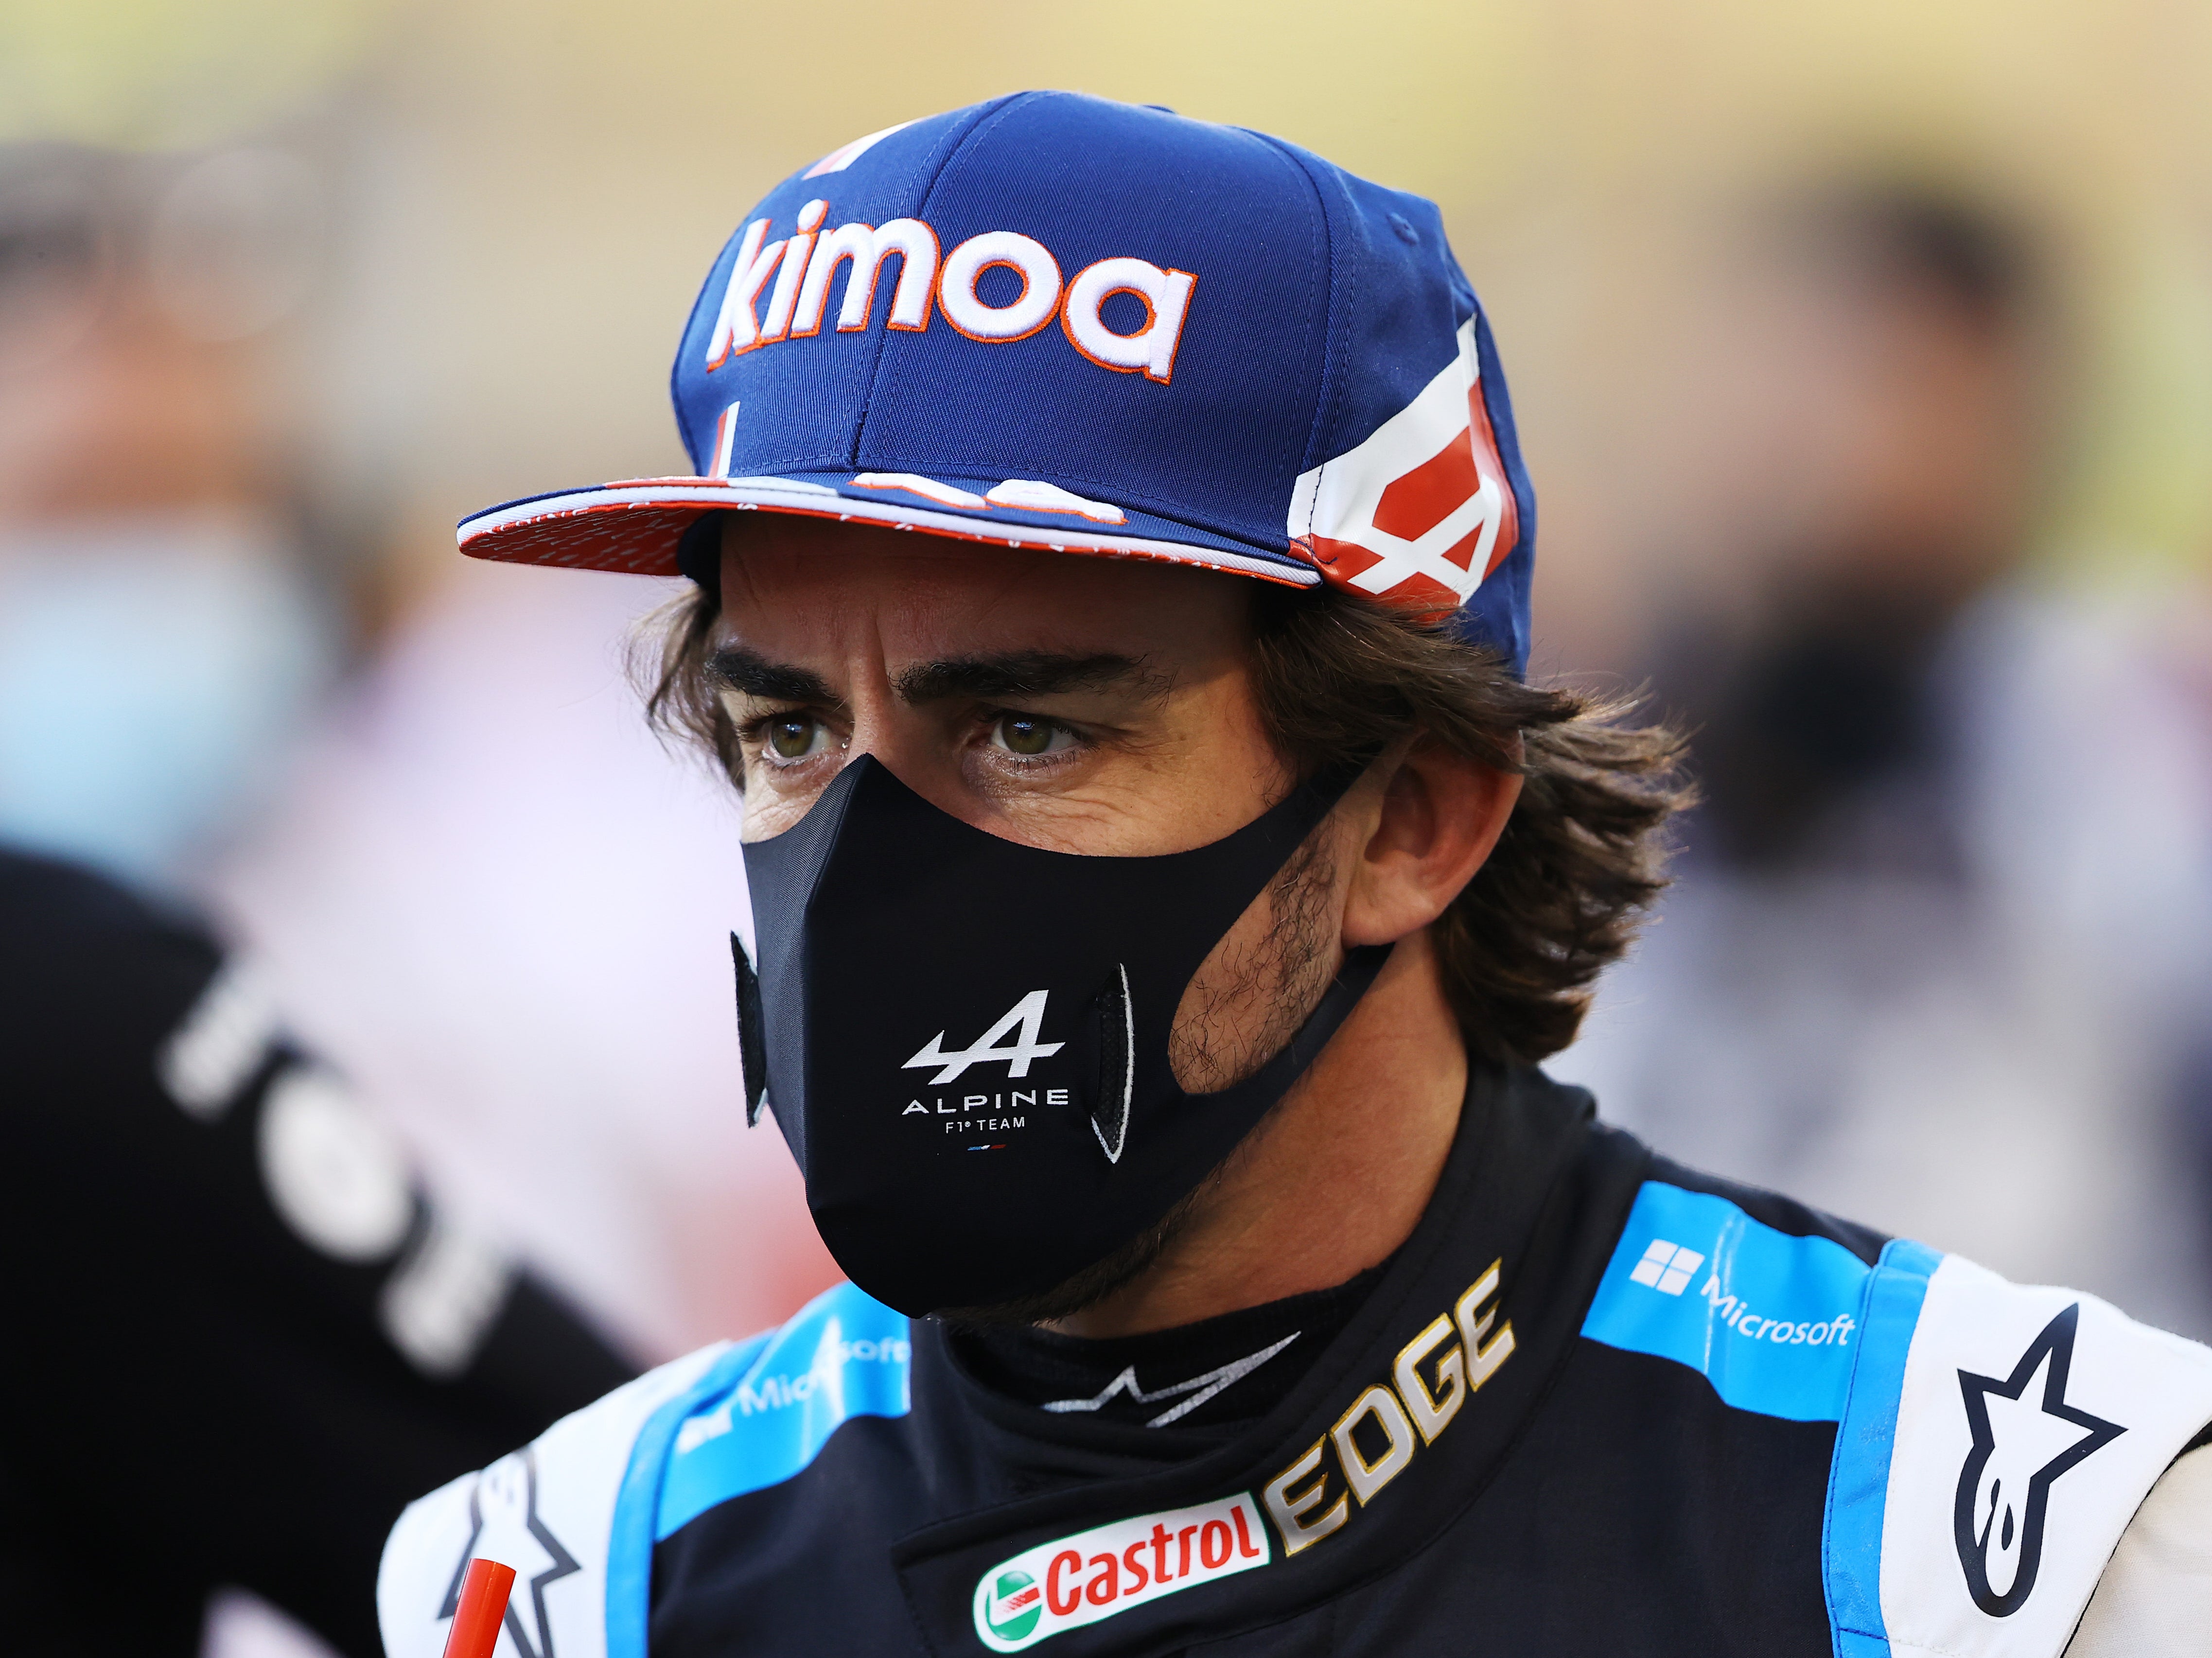 Fernando Alonso has returned to Formula One and Renault – now Alpine – this season